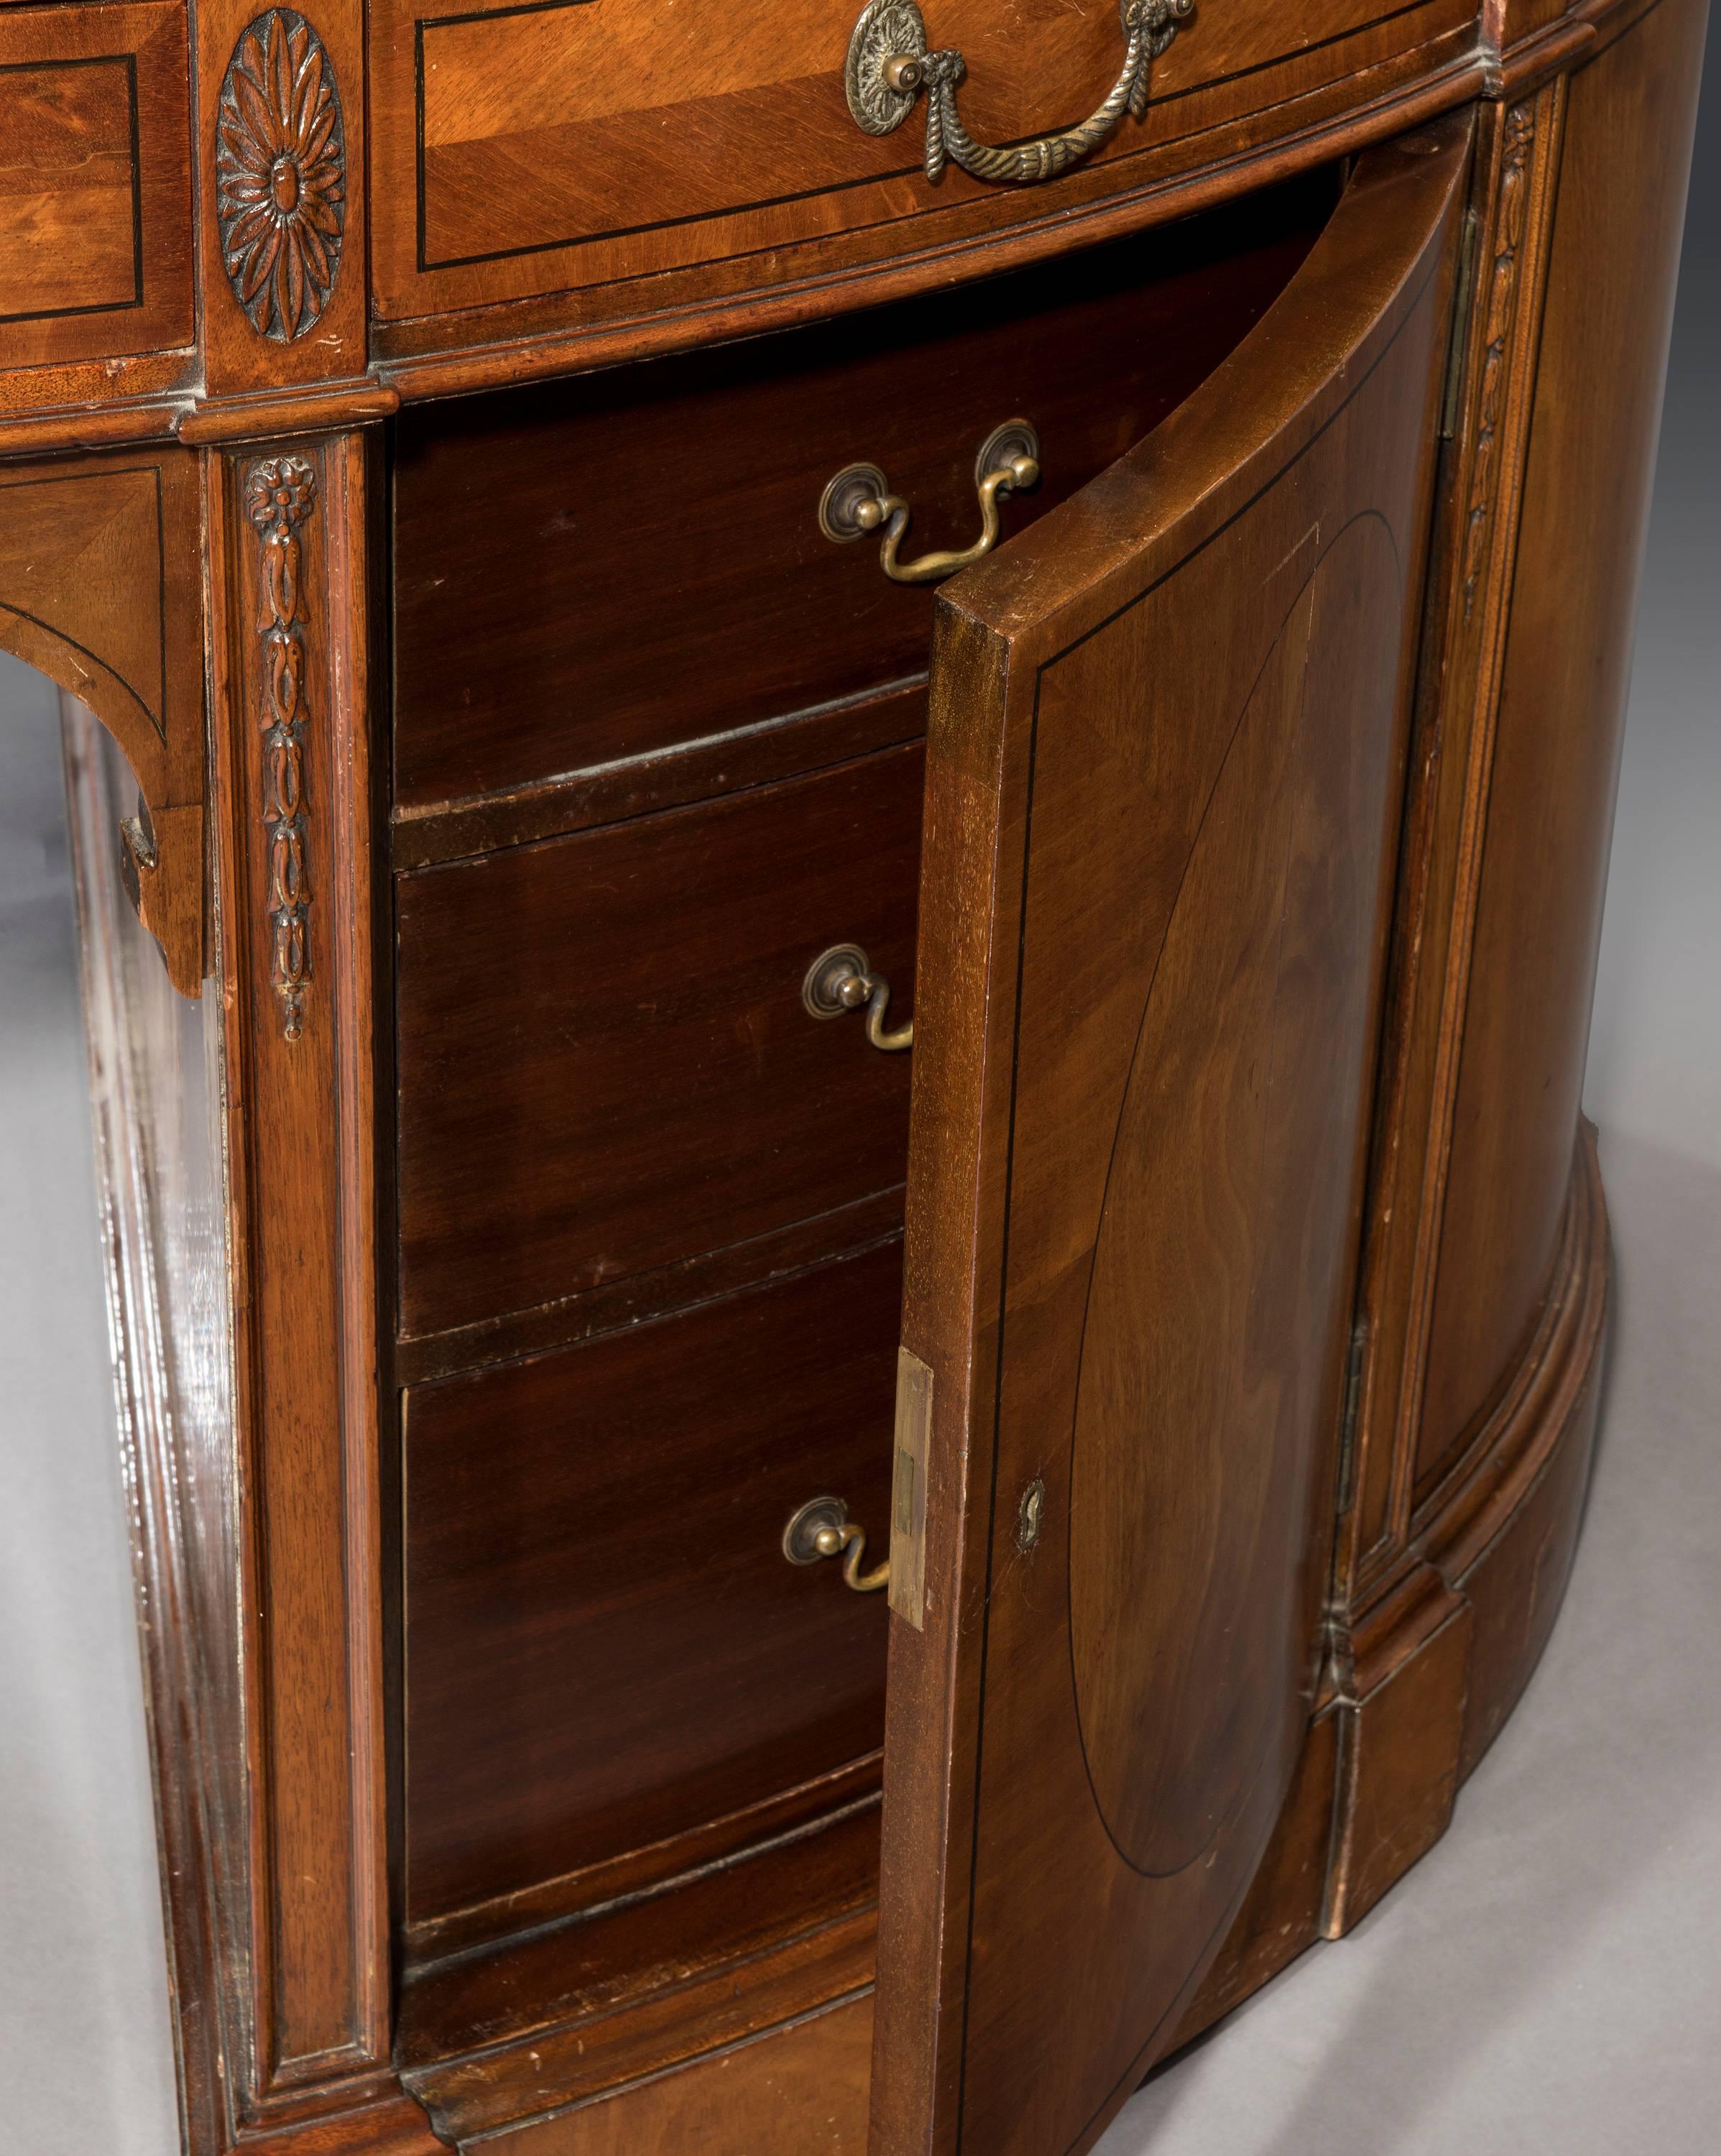 The rare oval-shaped breakfront form of this mahogany partners pedestal desk retains a brown tooled leather top above ebony lined frieze drawers flanked by carved patarae. The contrasting bookmatched veneers and ebony stringing to the drawer fronts